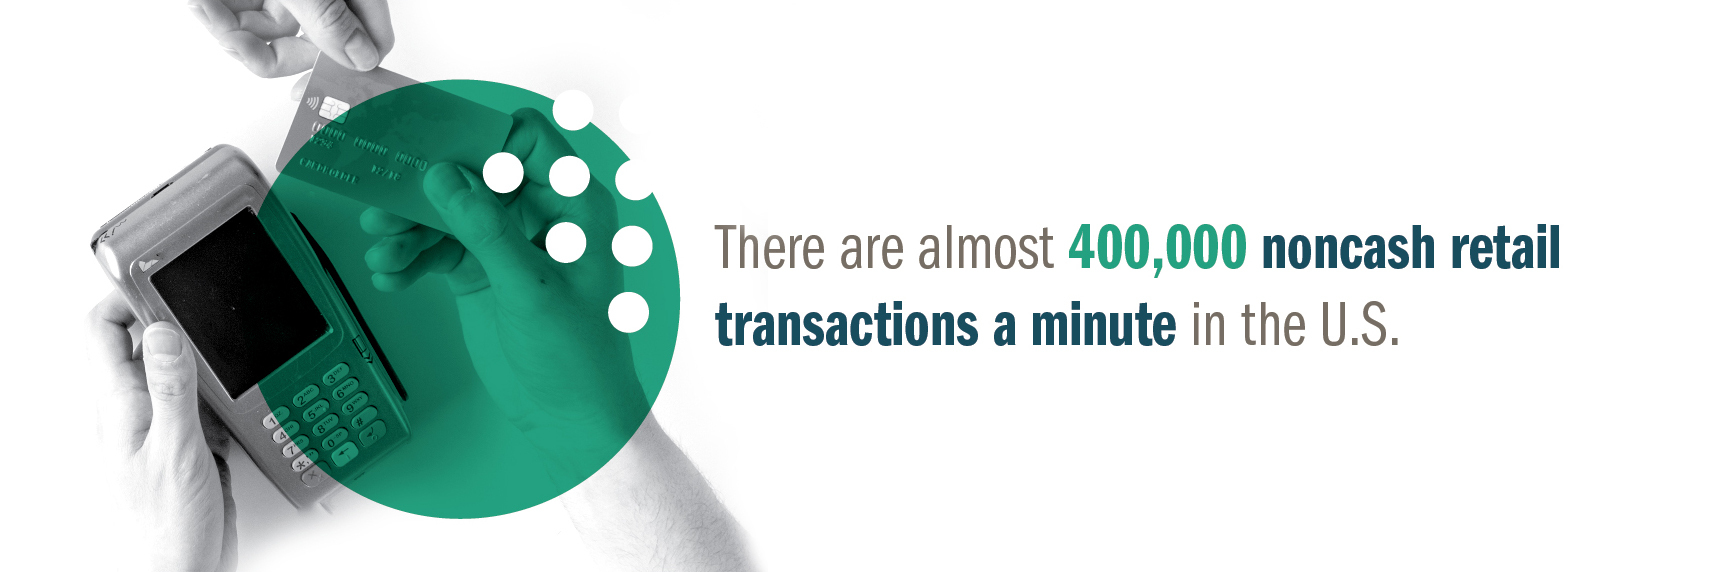 Infographic: There are almost 400,000 retail transactions a minute in the U.S. noncash retail transactions